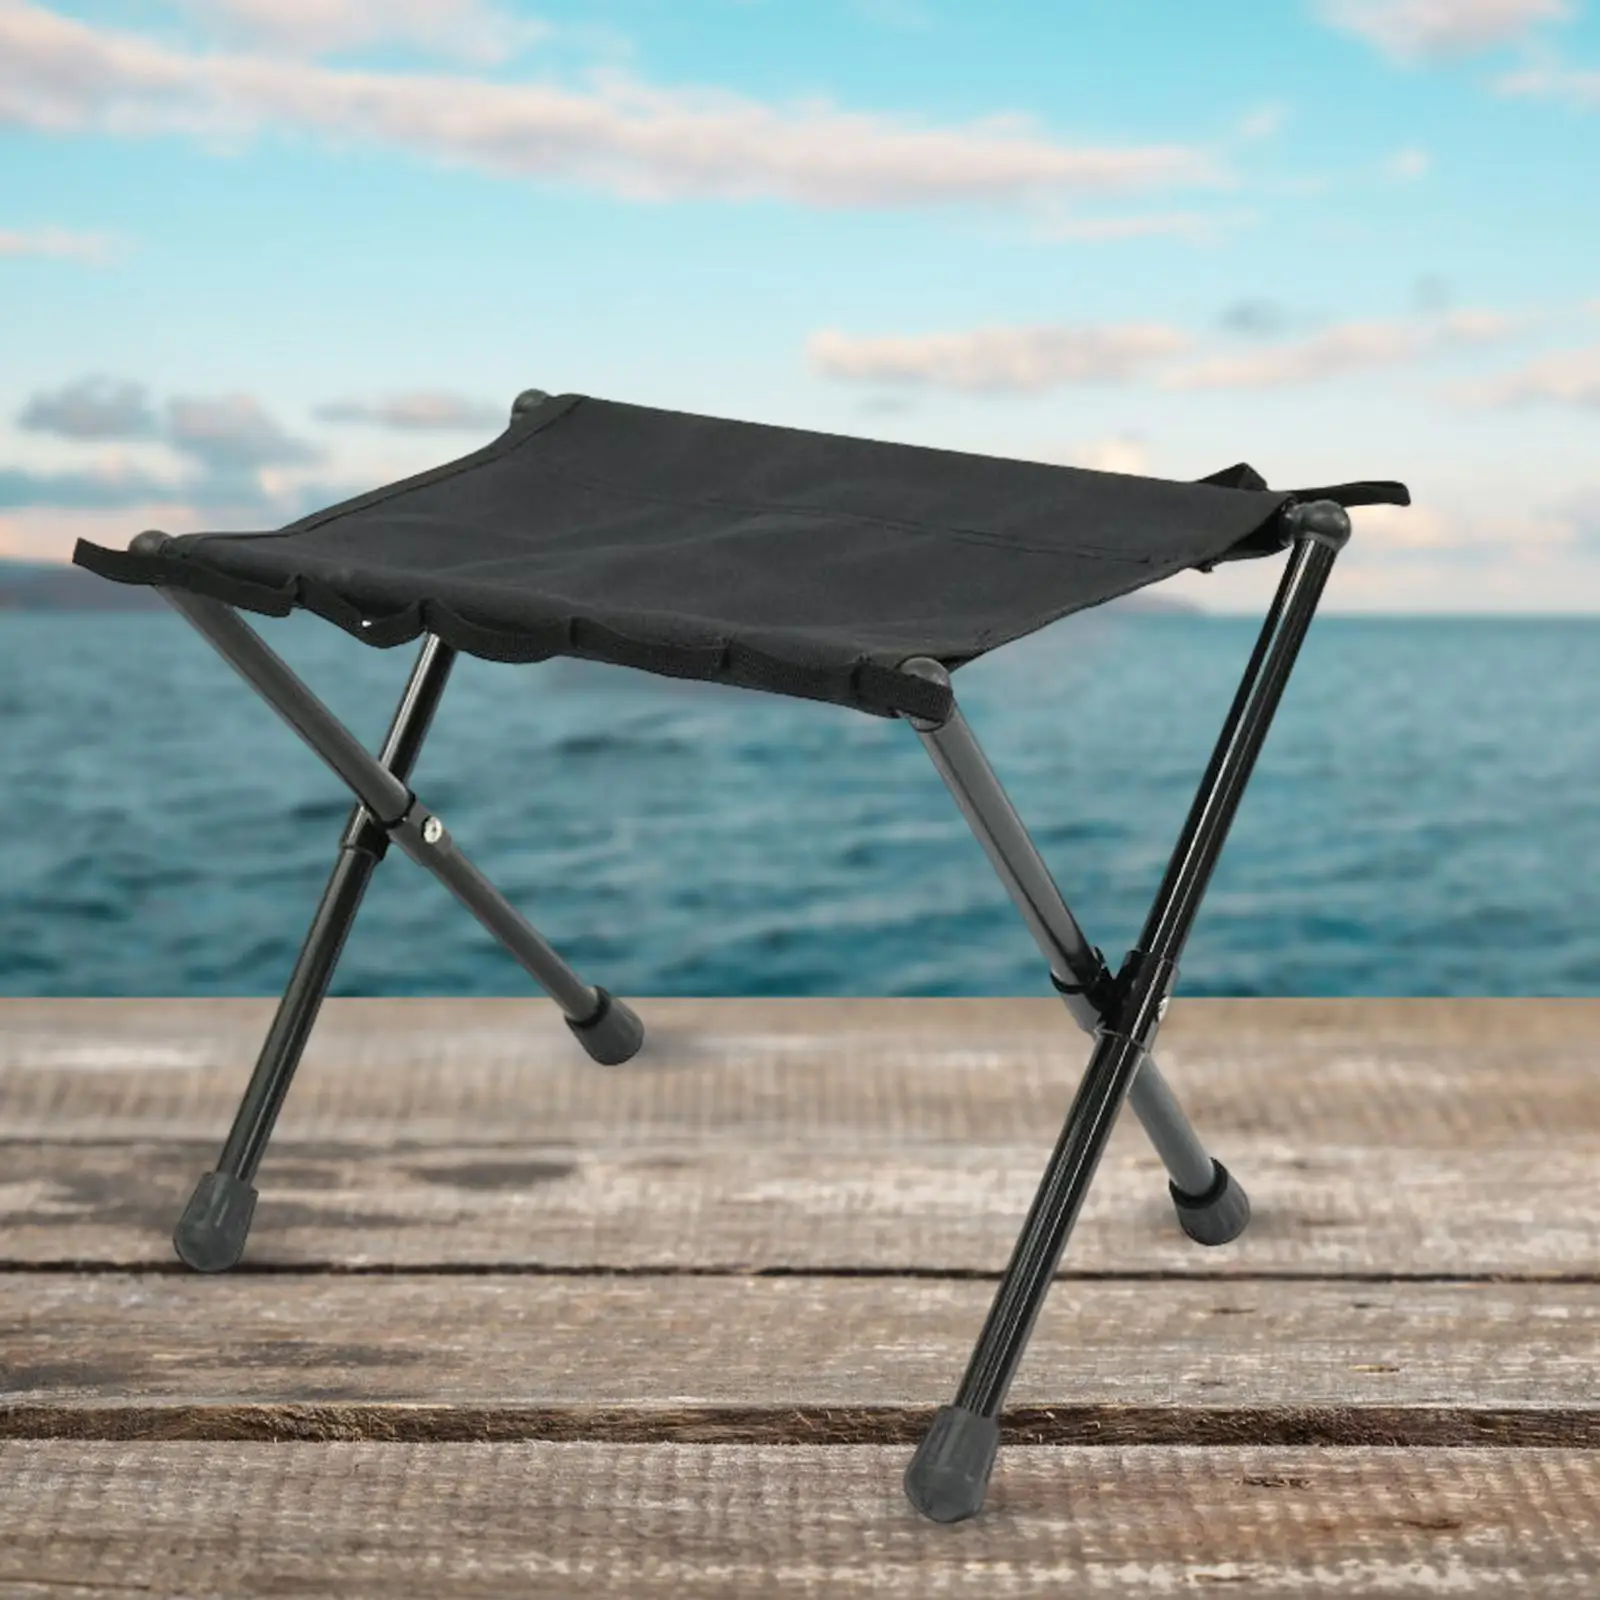 Outdoor Camping Chair Durable Collapsible Camping Stool for Travel Fishing